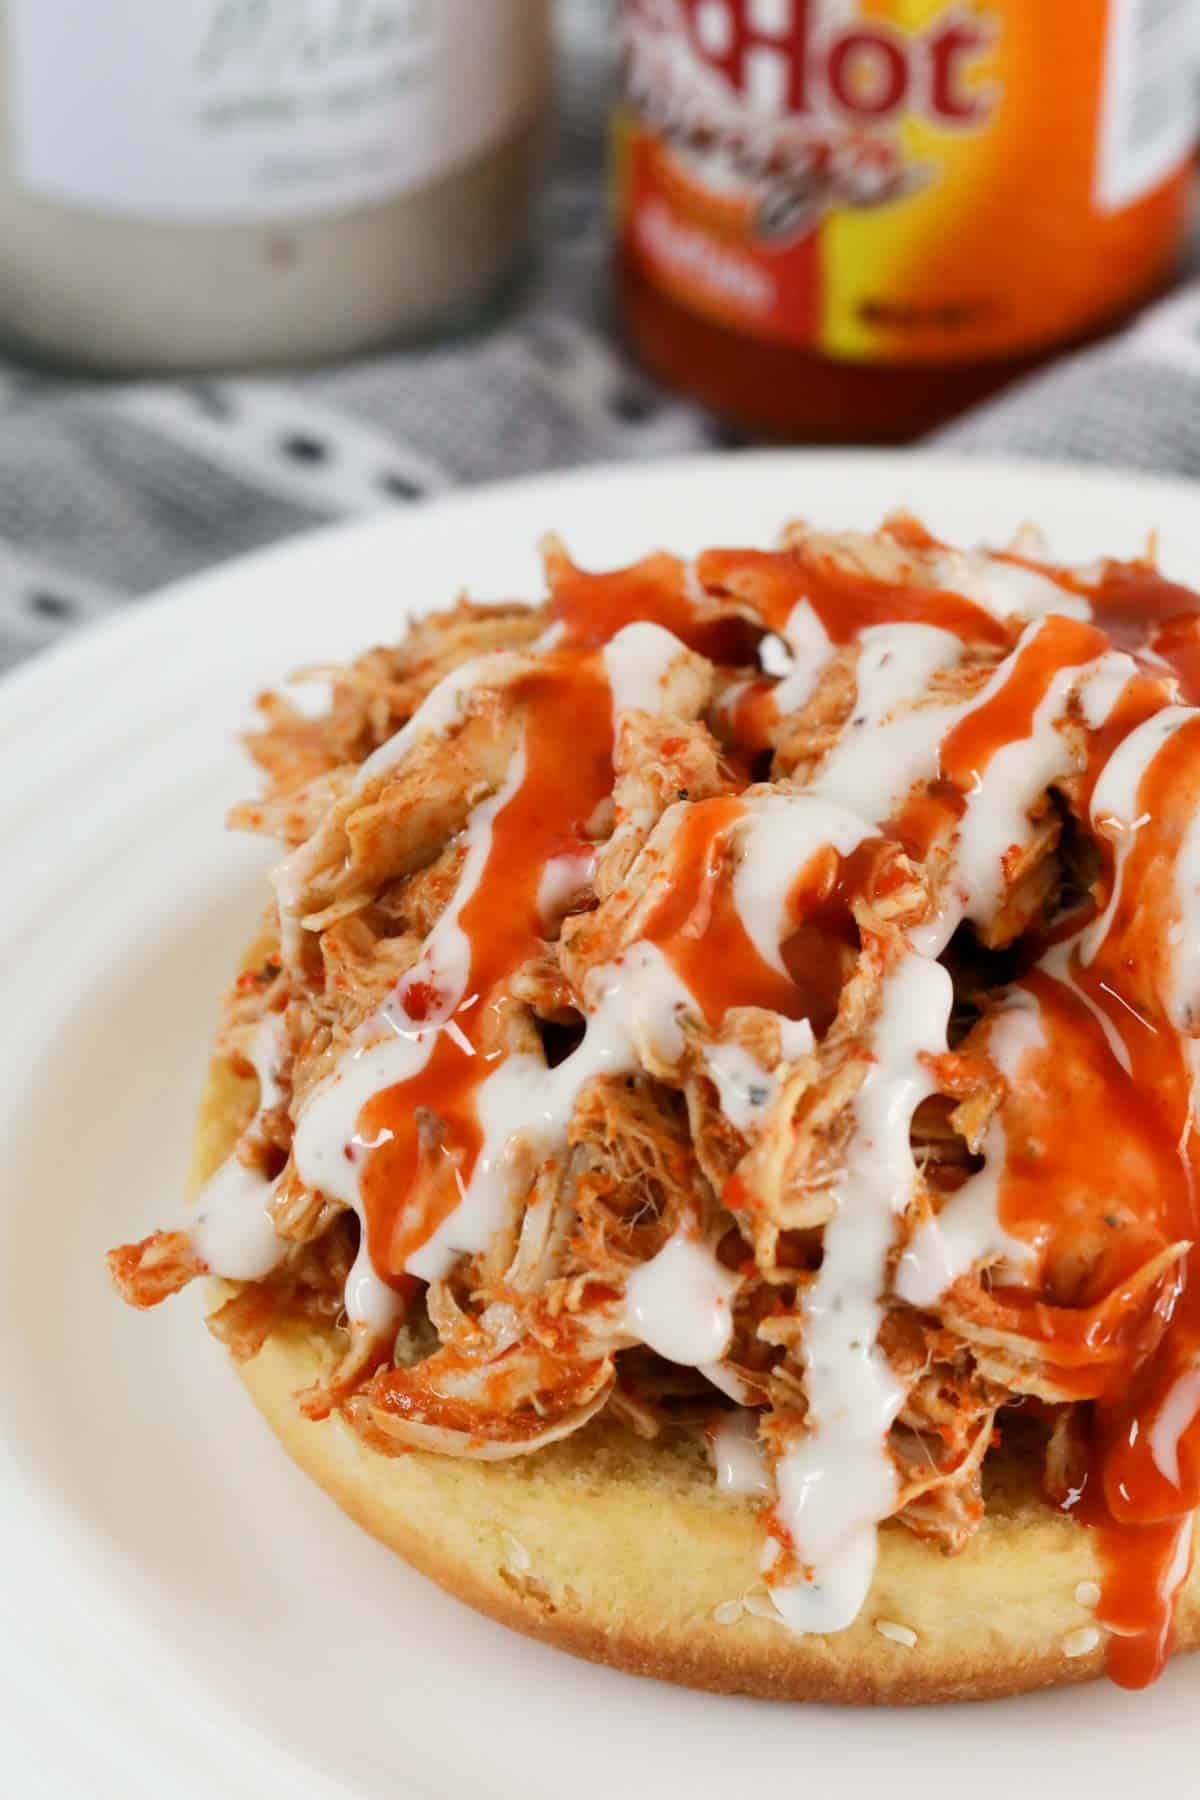 Hot and spicy sauce and creamy dressing drizzled on shredded chicken.